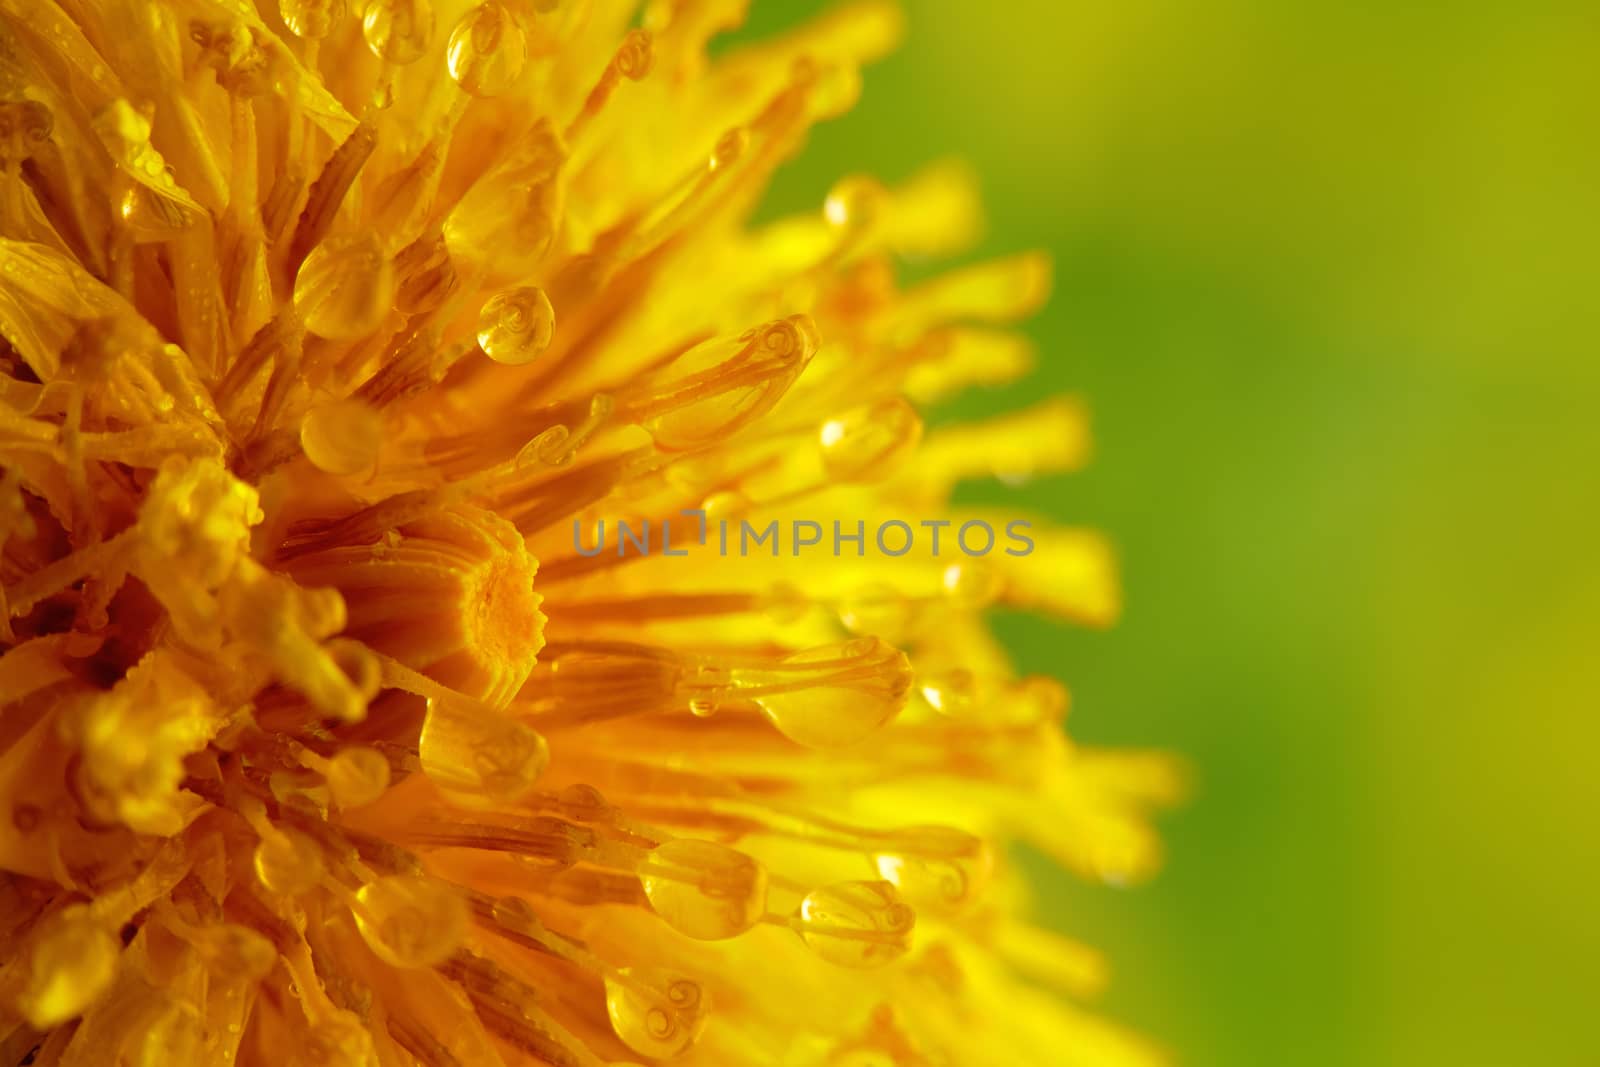 Close-up of a dandelion with water droplets